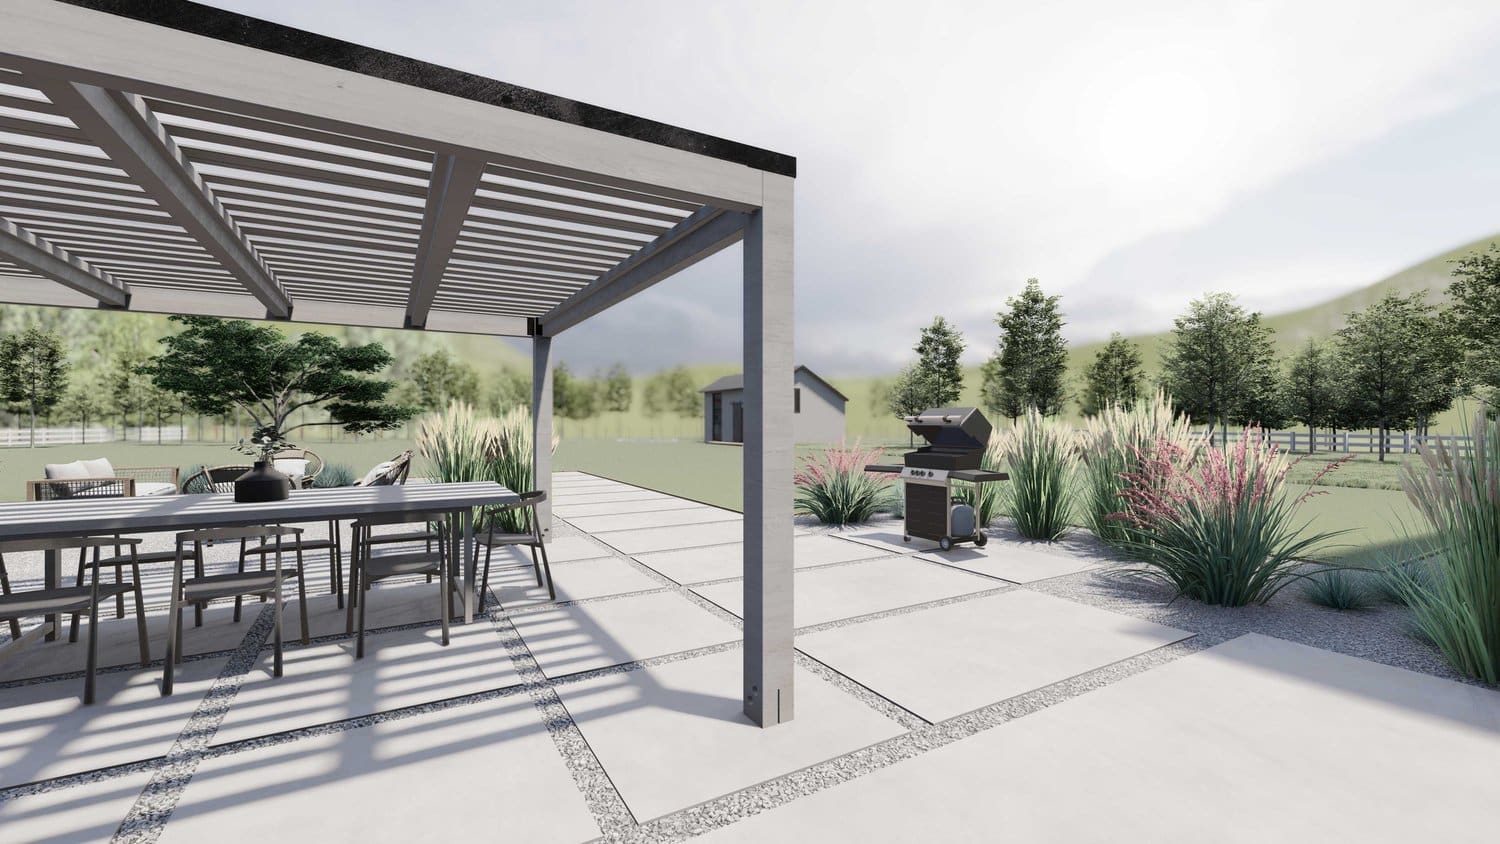 Park City paver patio with pergola over dining area, outdoor kitchen, plants and trees